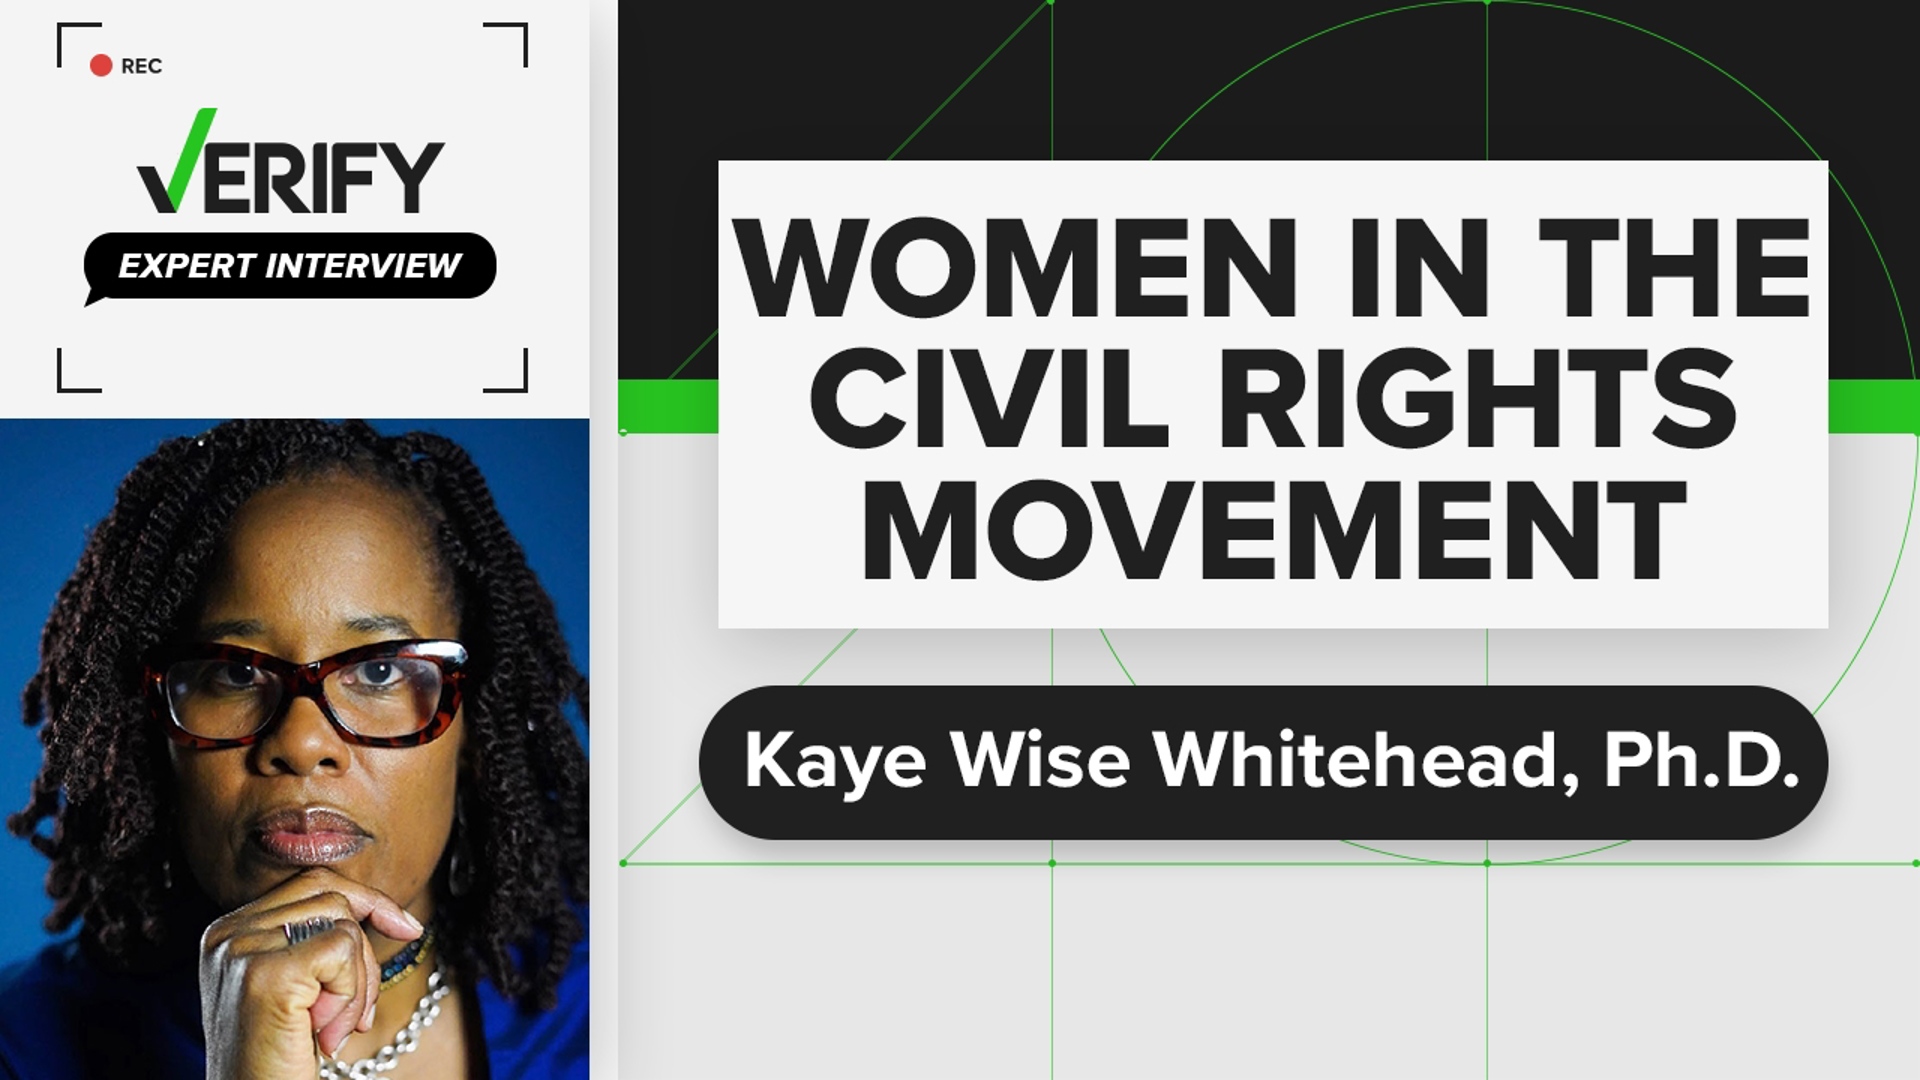 Kaye Wise Whitehead, Ph.D. discusses the erased and often forgotten history of Black women in the civil rights movement.